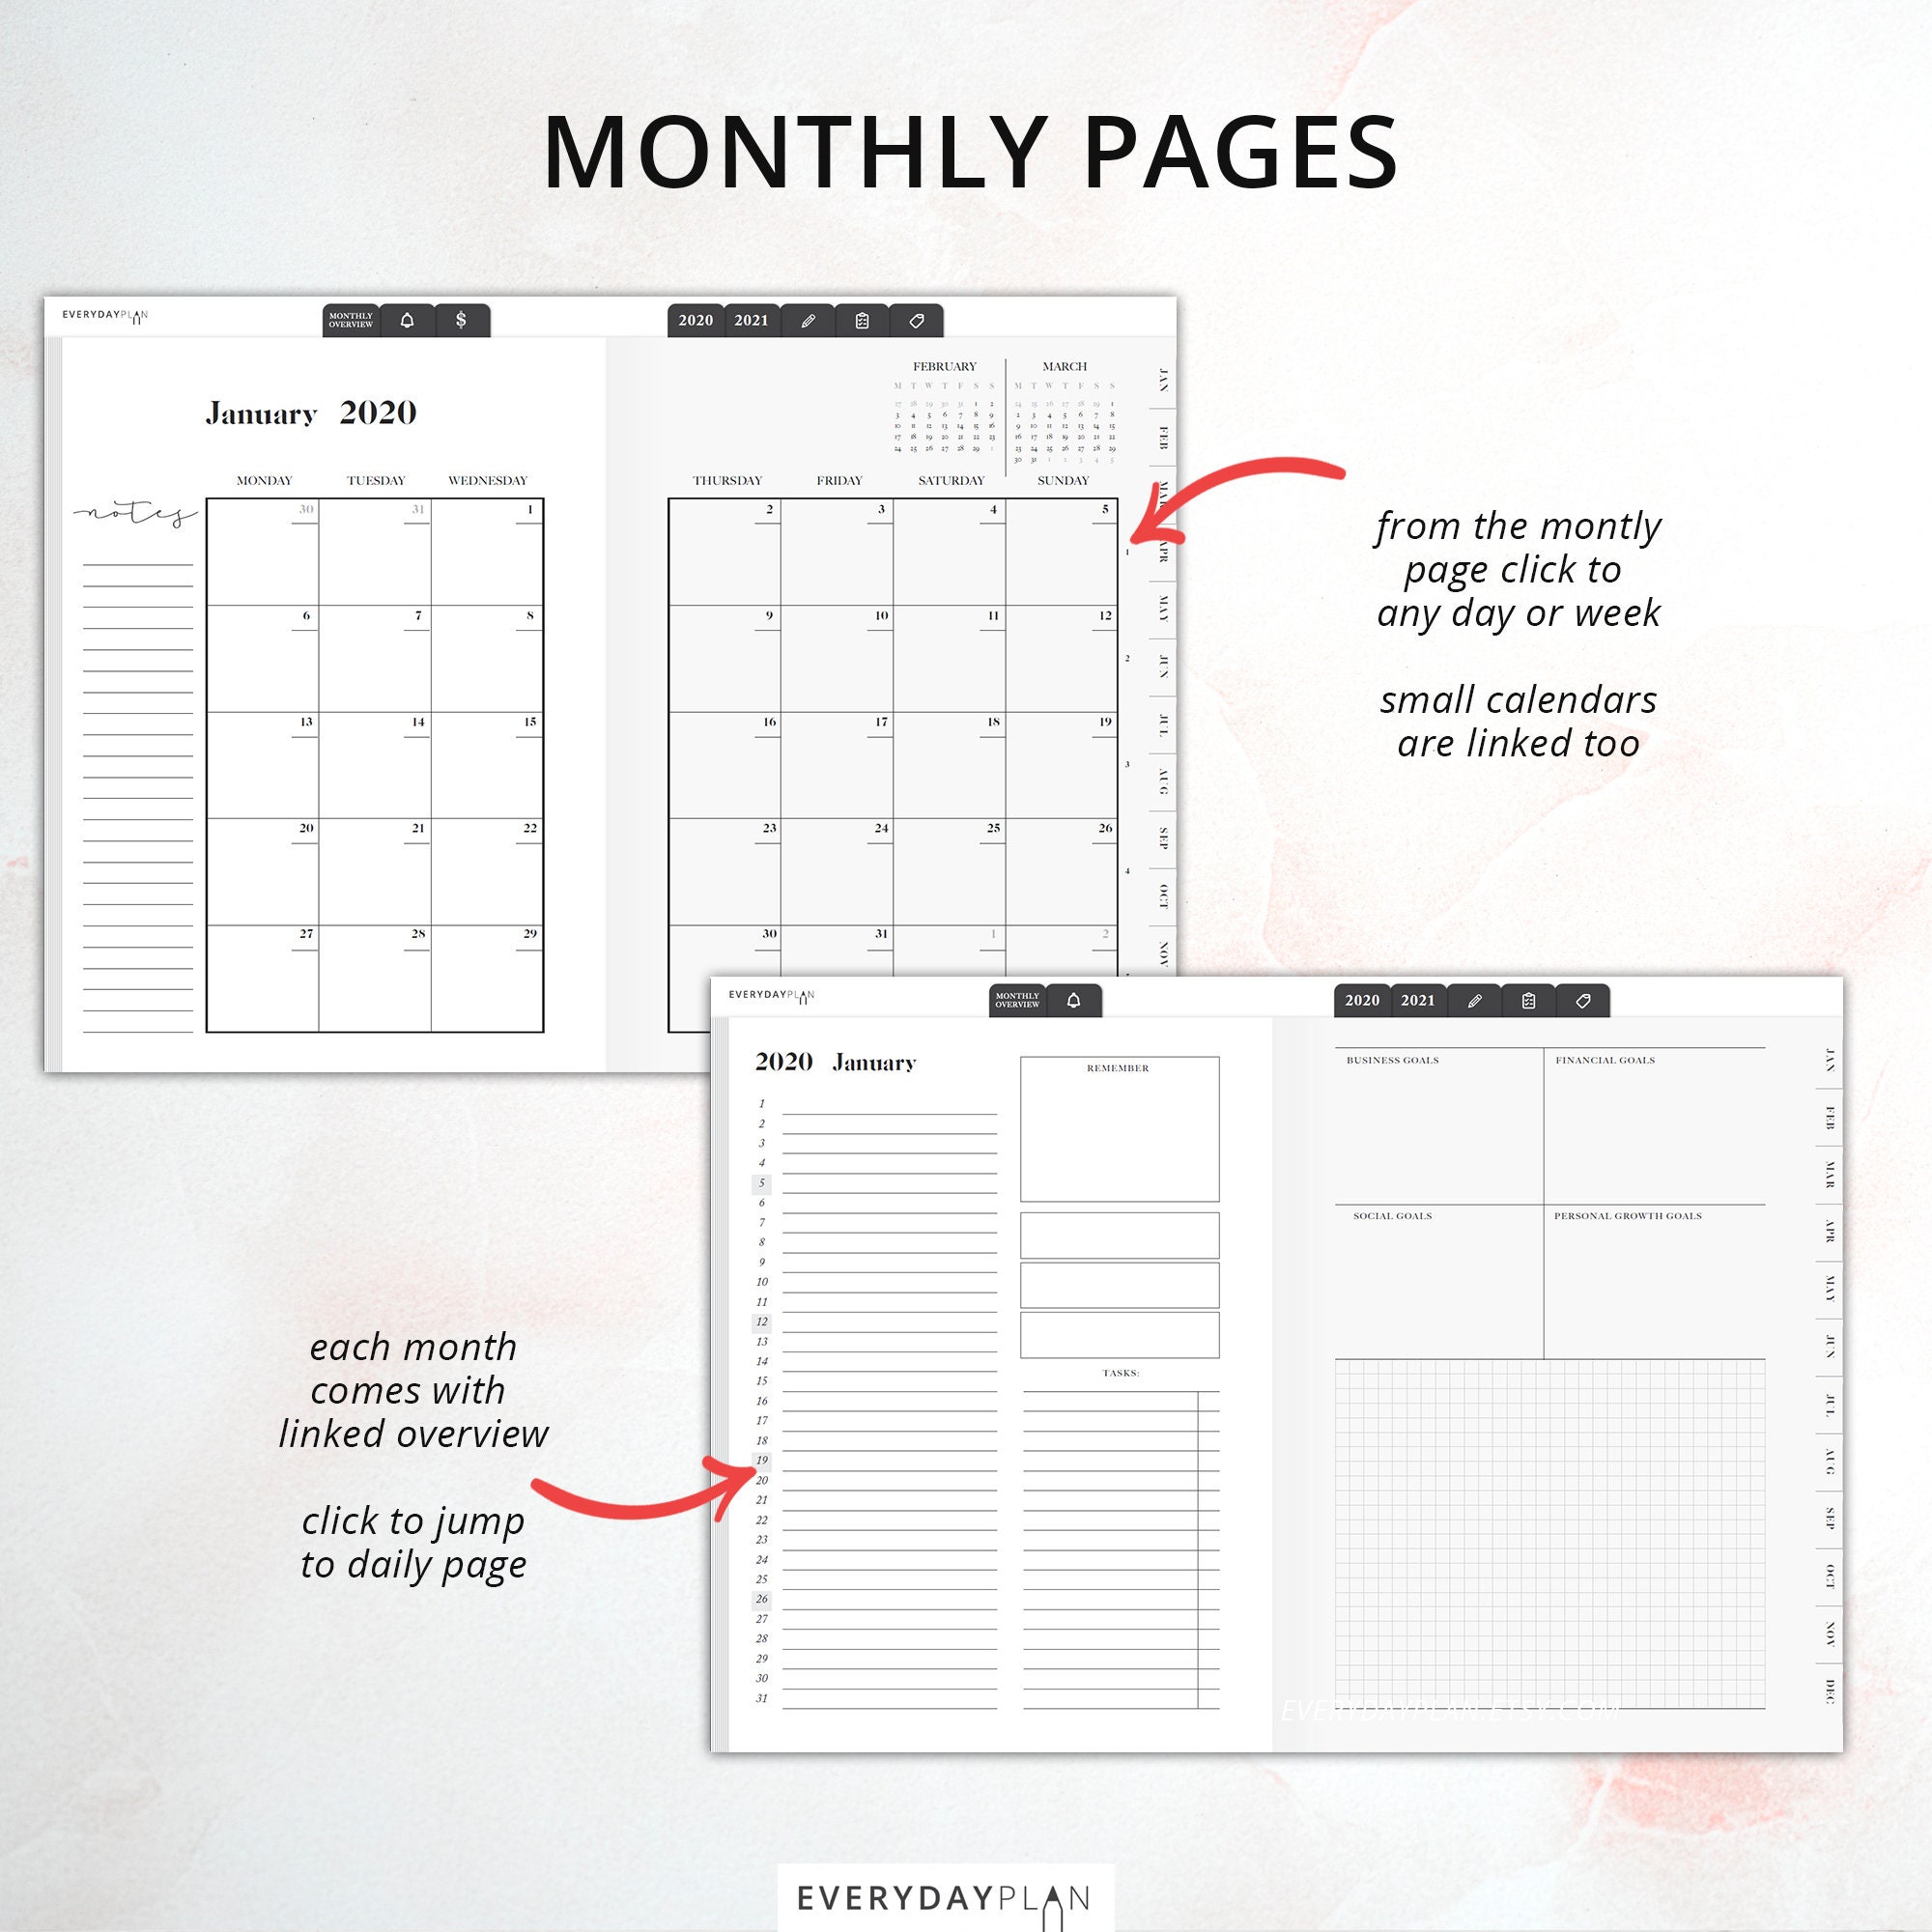 goodnotes planner template